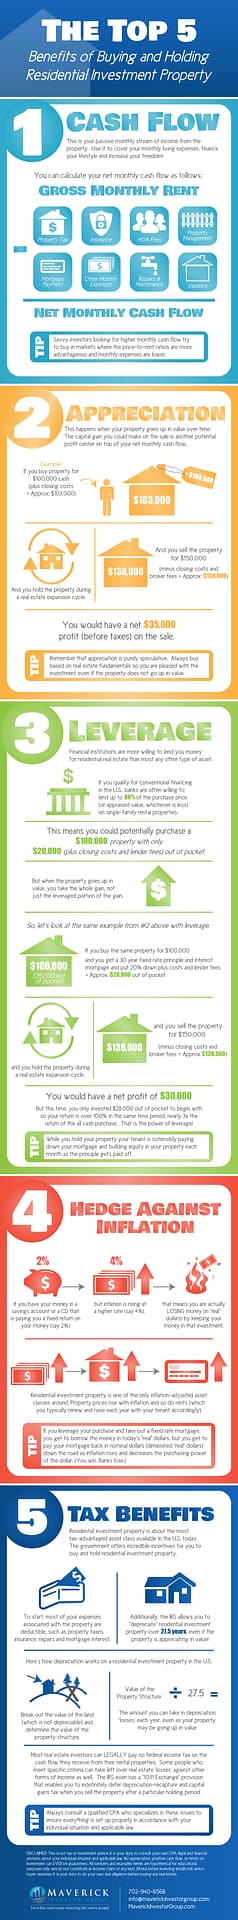 5 benefits of real estate investing infographic